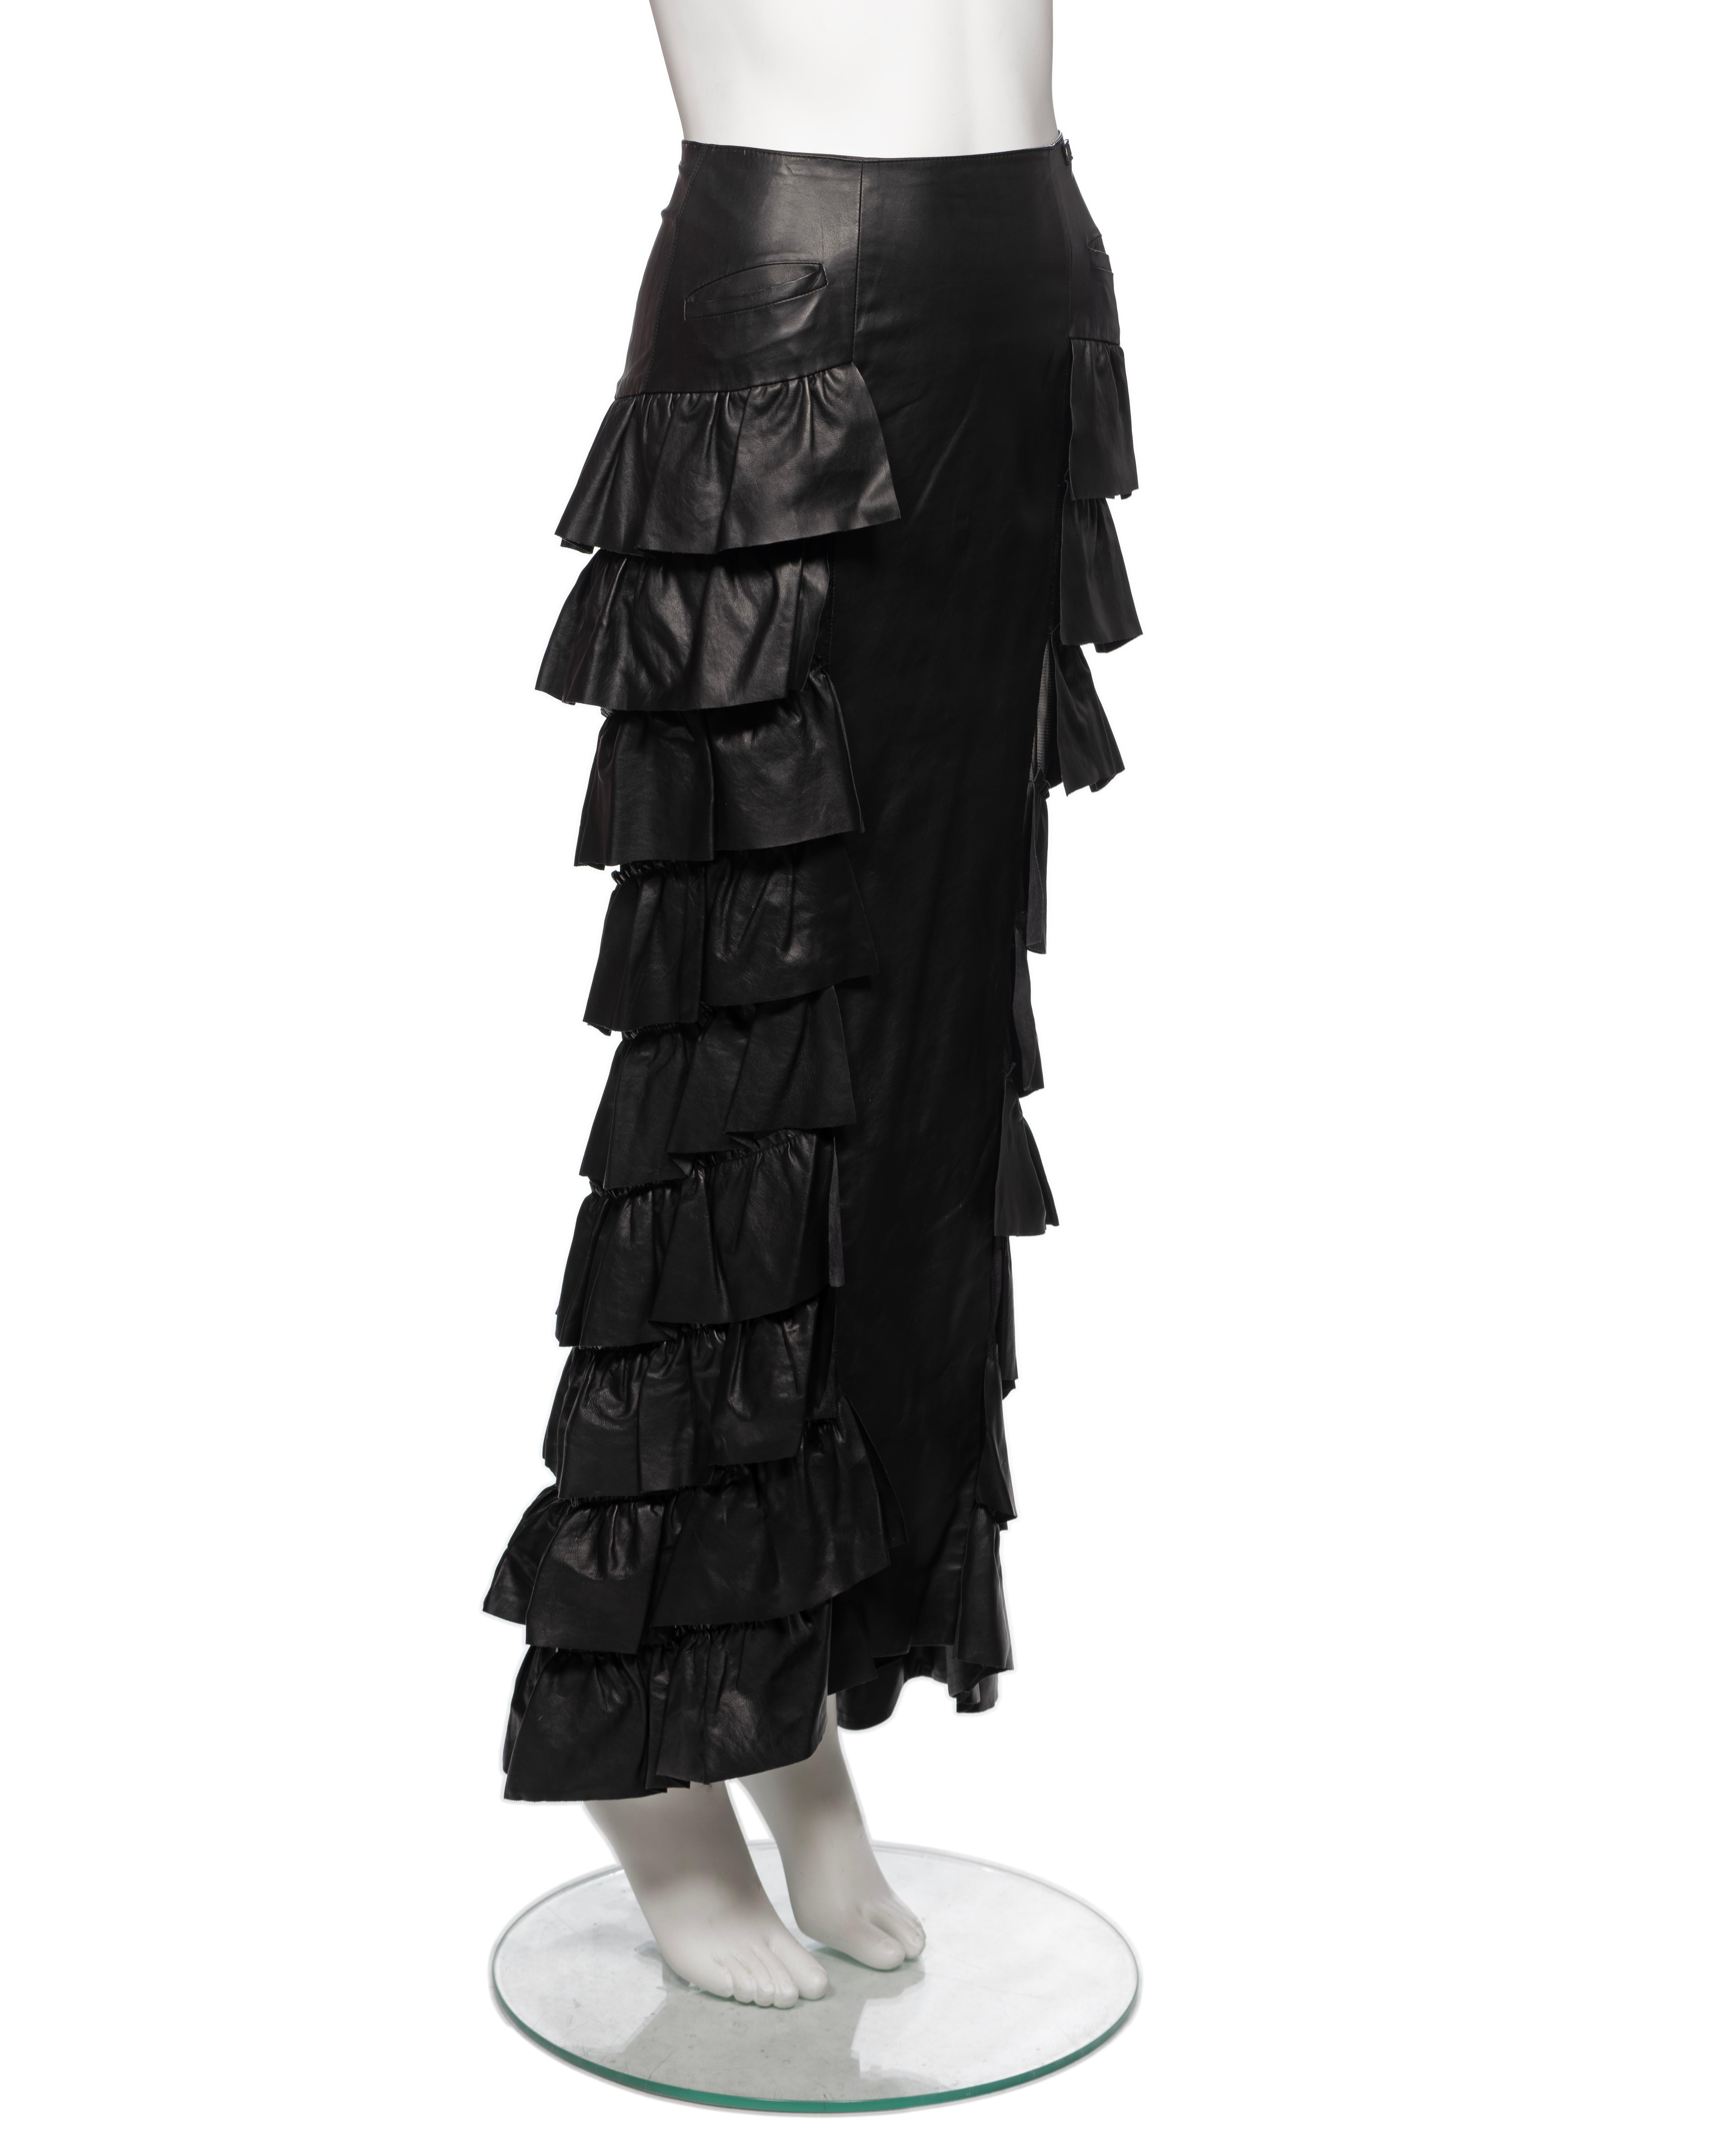 Chanel by Karl Lagerfeld Black Leather Tiered Ruffled Maxi Skirt, FW 2001 For Sale 2